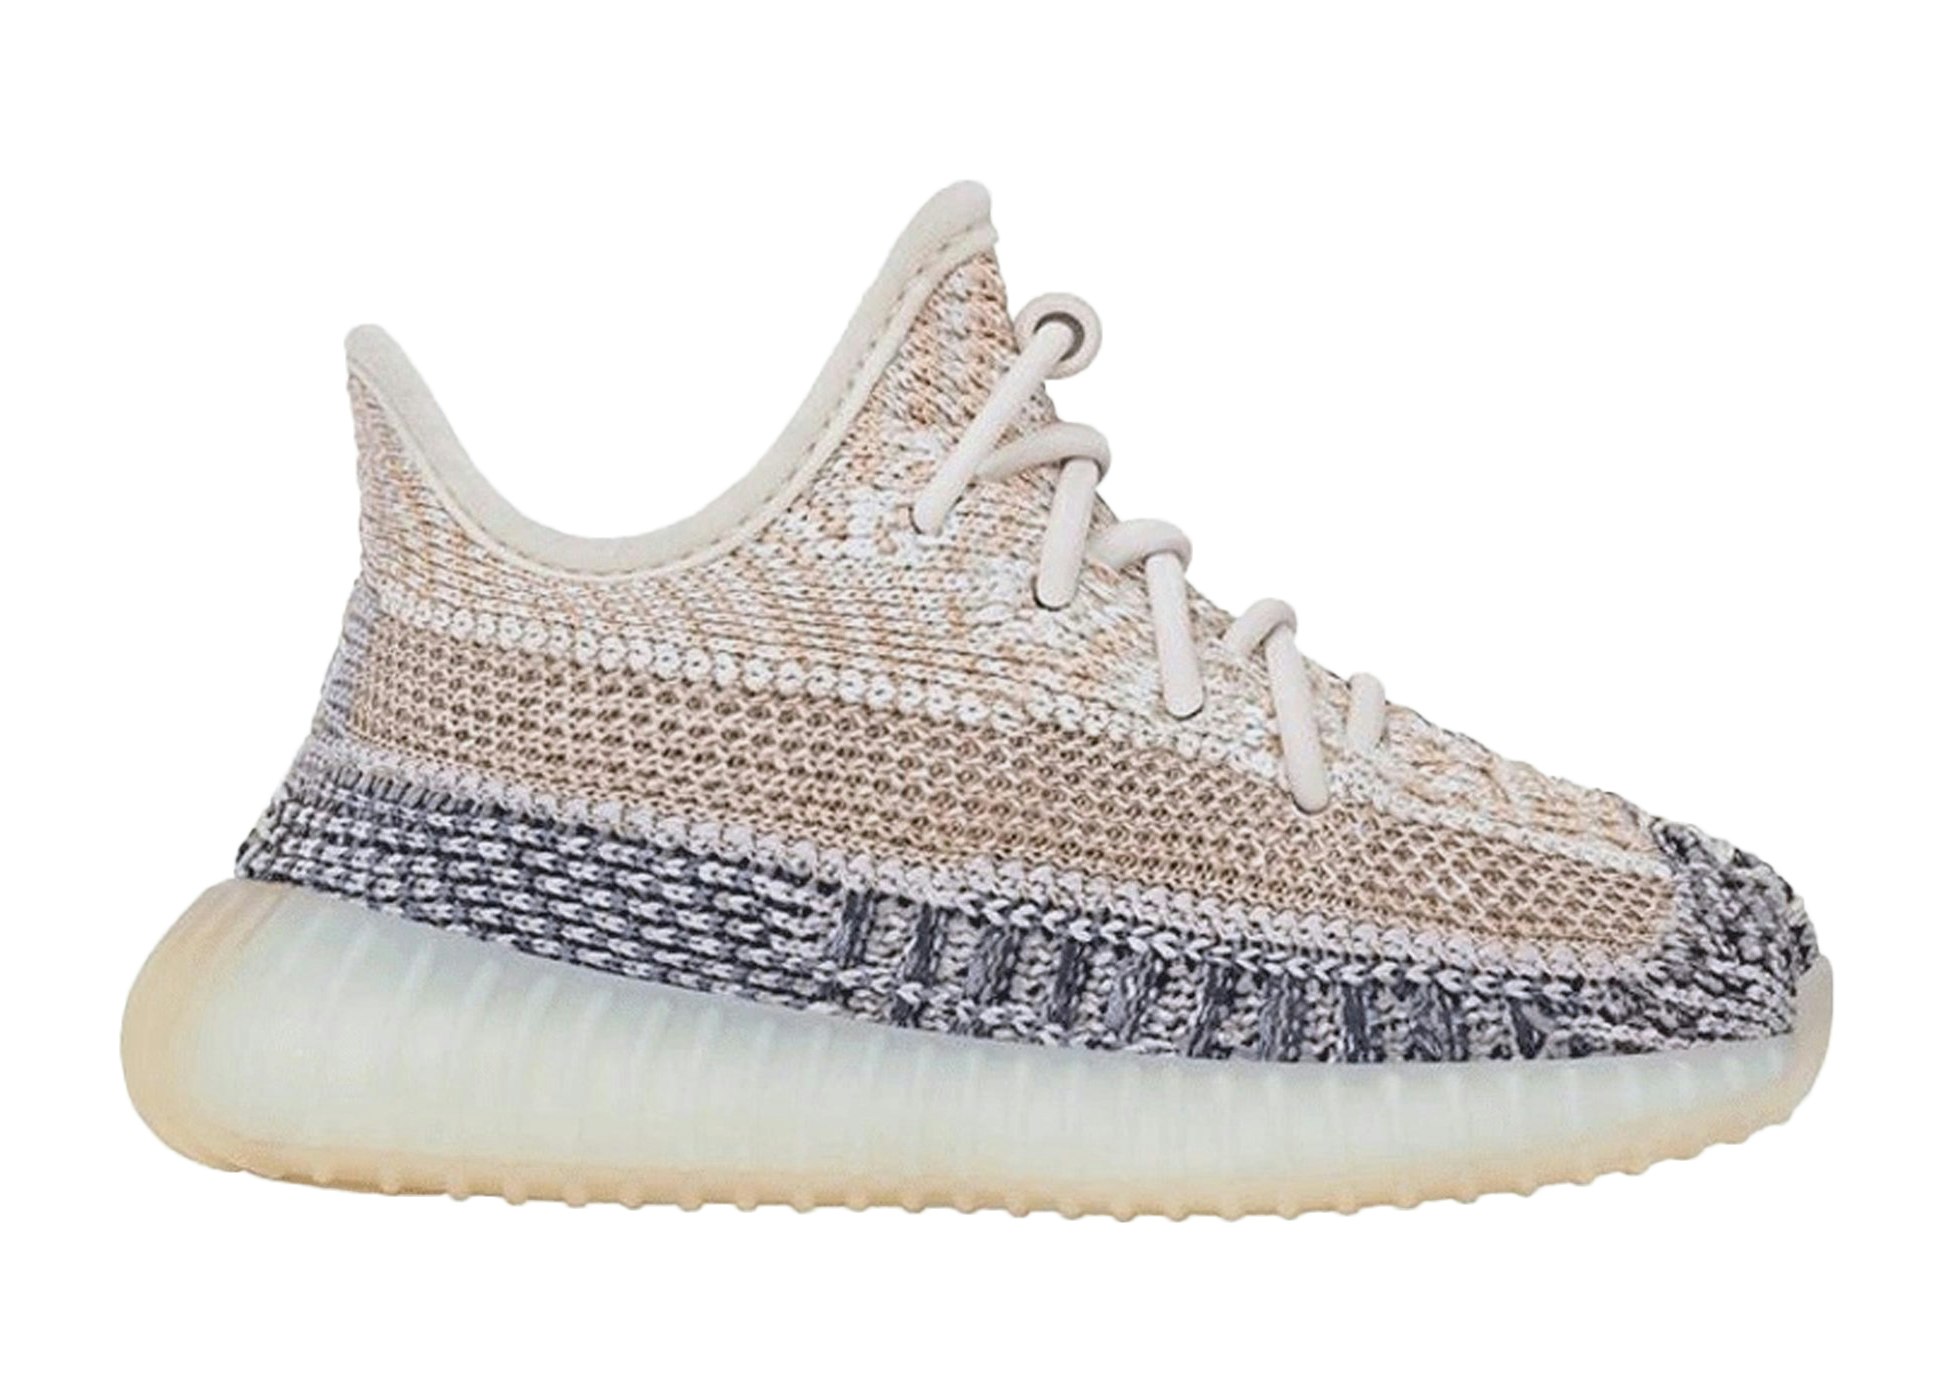 adidas Yeezy Boost 350 V2 Ash Pearl (Infant) 婴儿- GY7735 CN